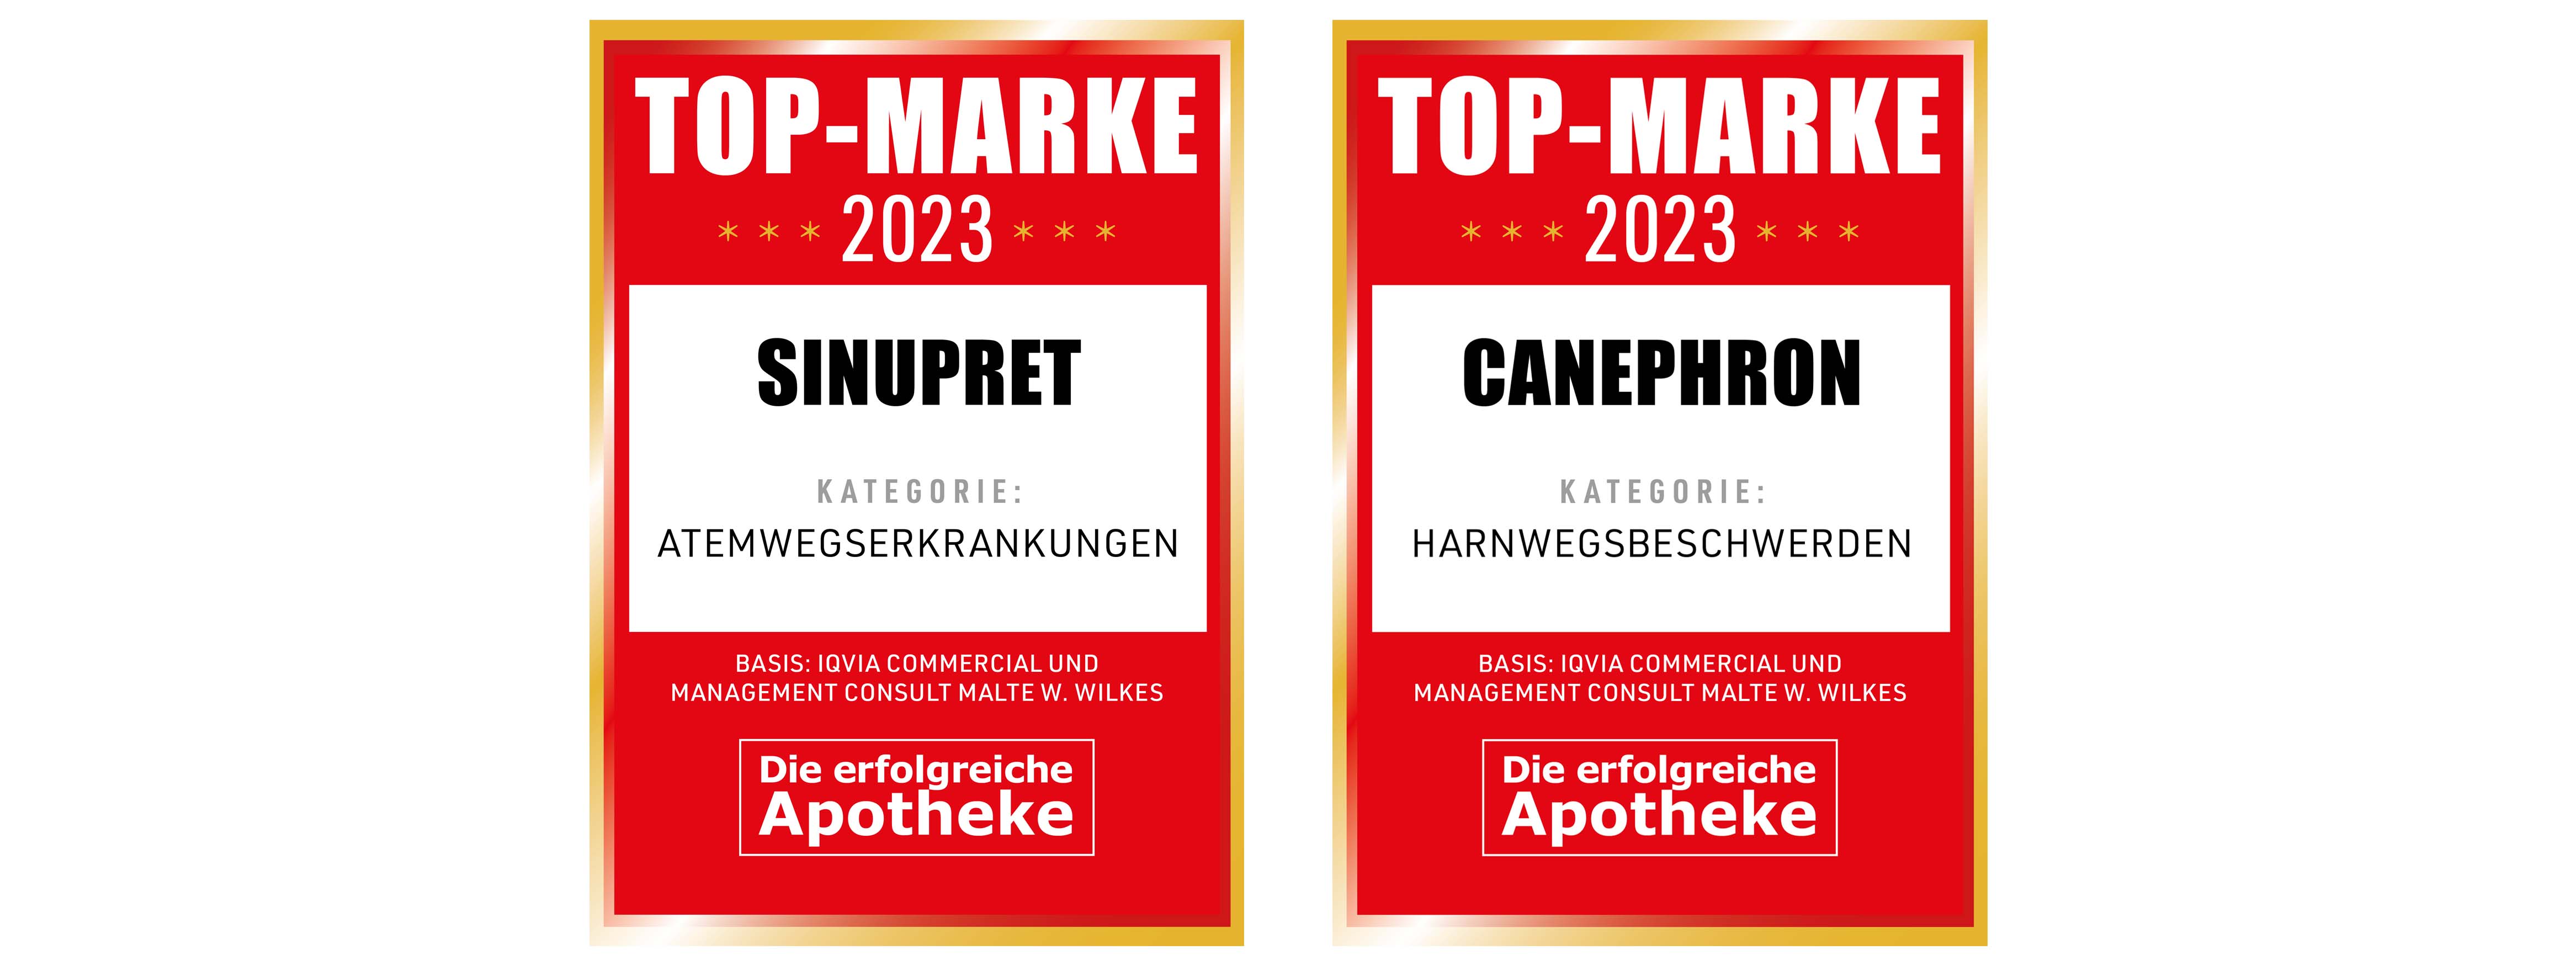 Awards 2023 for Sinupret and Canephron as Top Brand